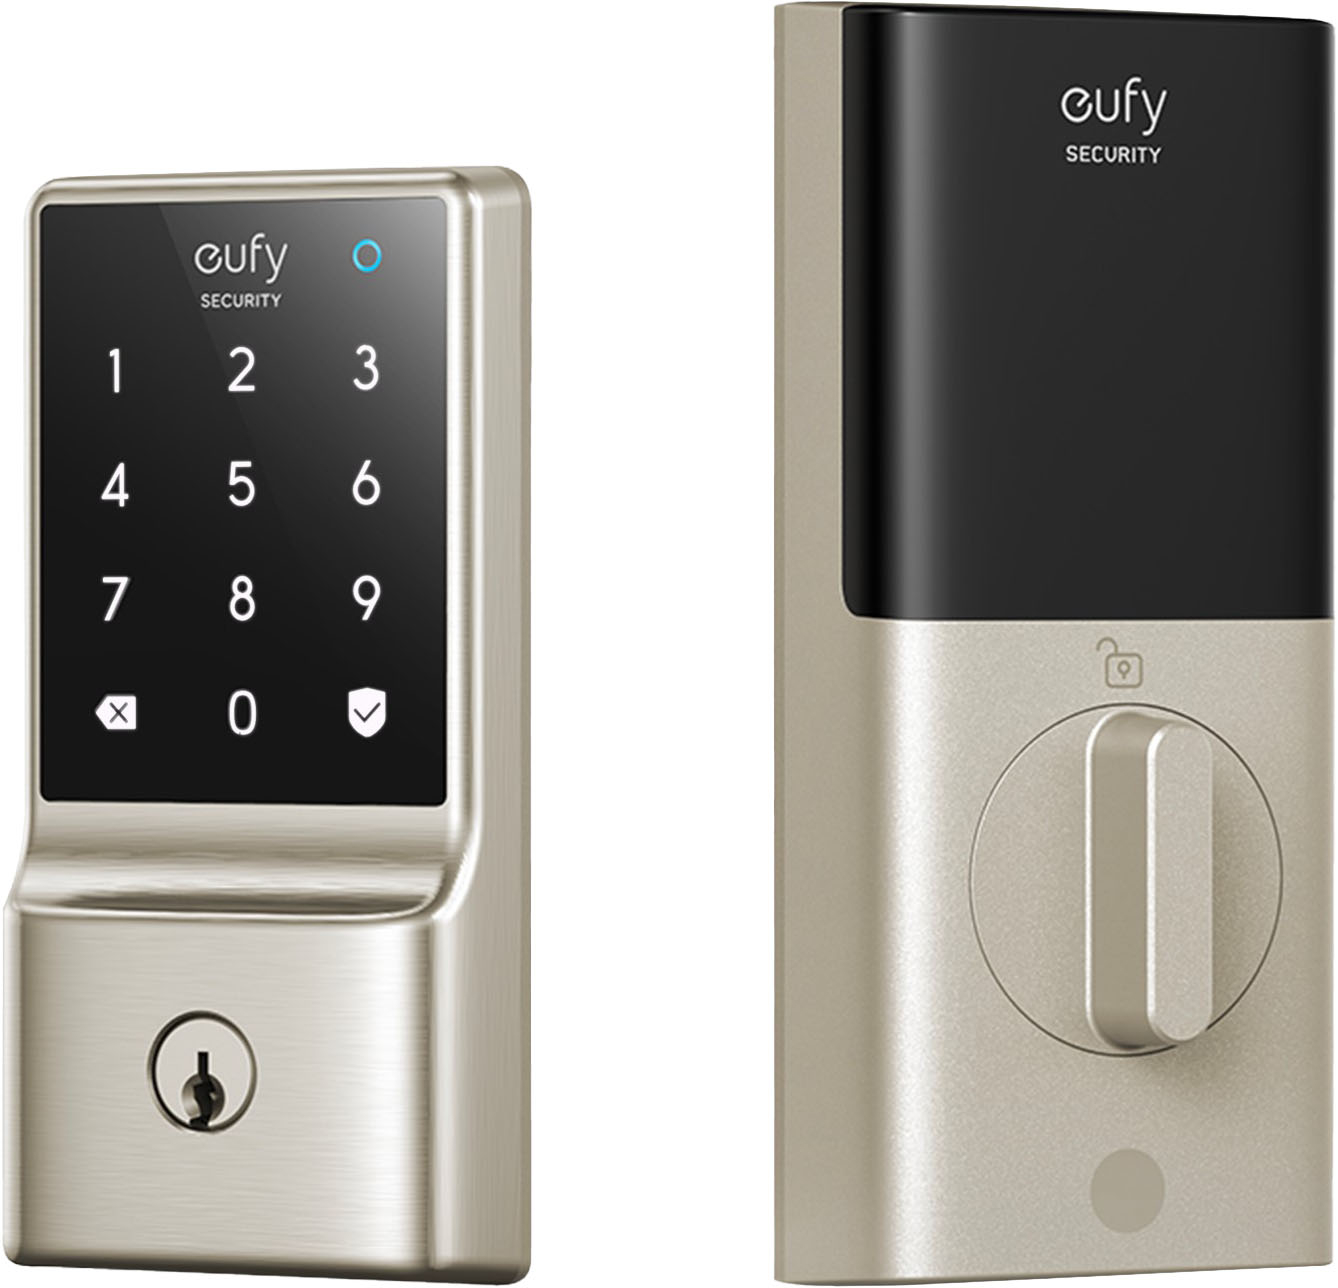 eufy Security - Smart Lock C210 WiFi Replacement Deadbolt with eufy App|Keypad|Biometric Access - White